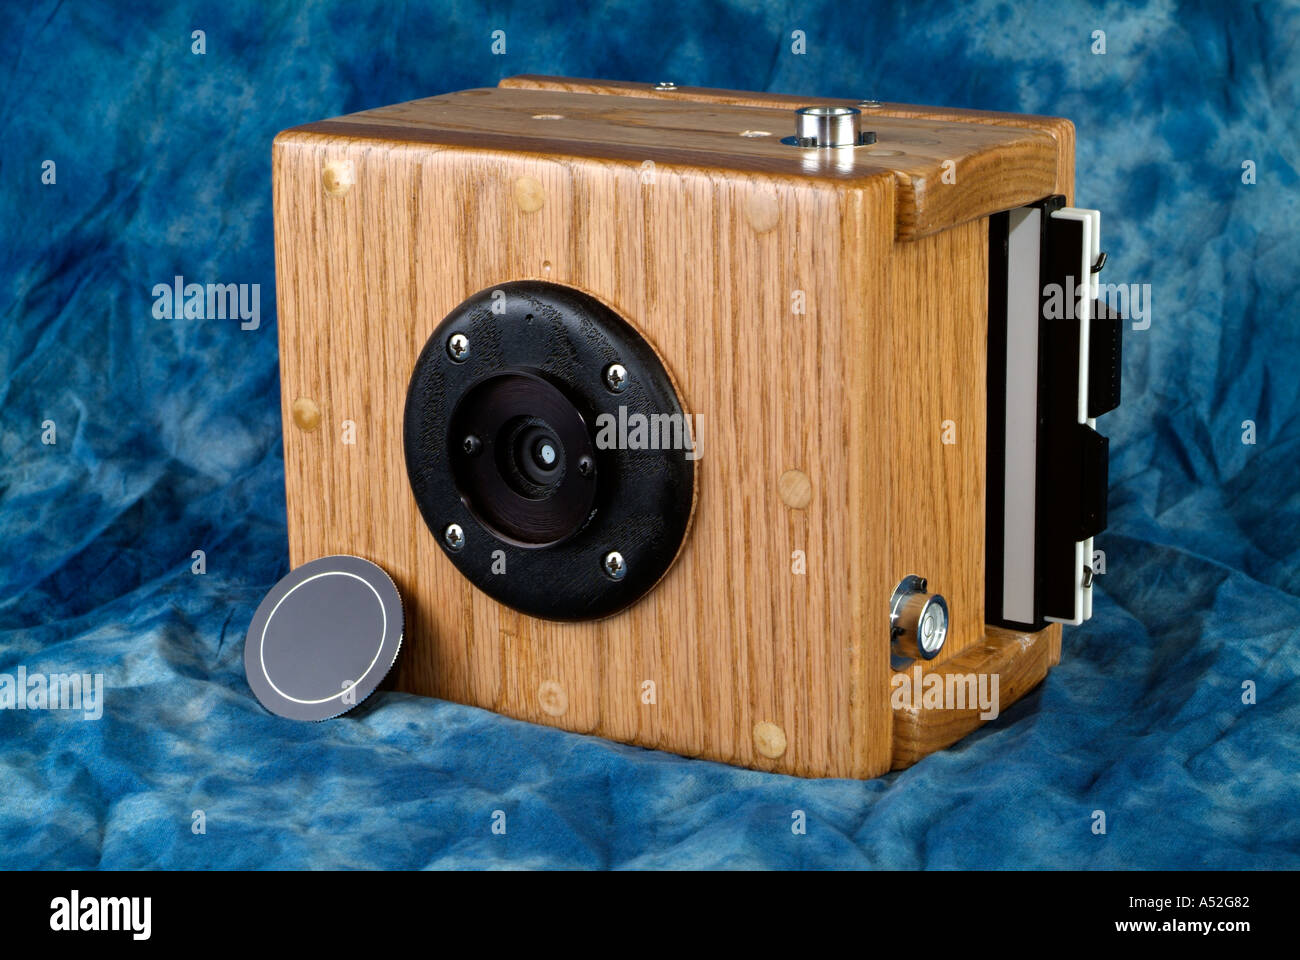 home made wooden pinhole camera 4x5 format laser drilled pinhole red oak large  format cameras Stock Photo - Alamy